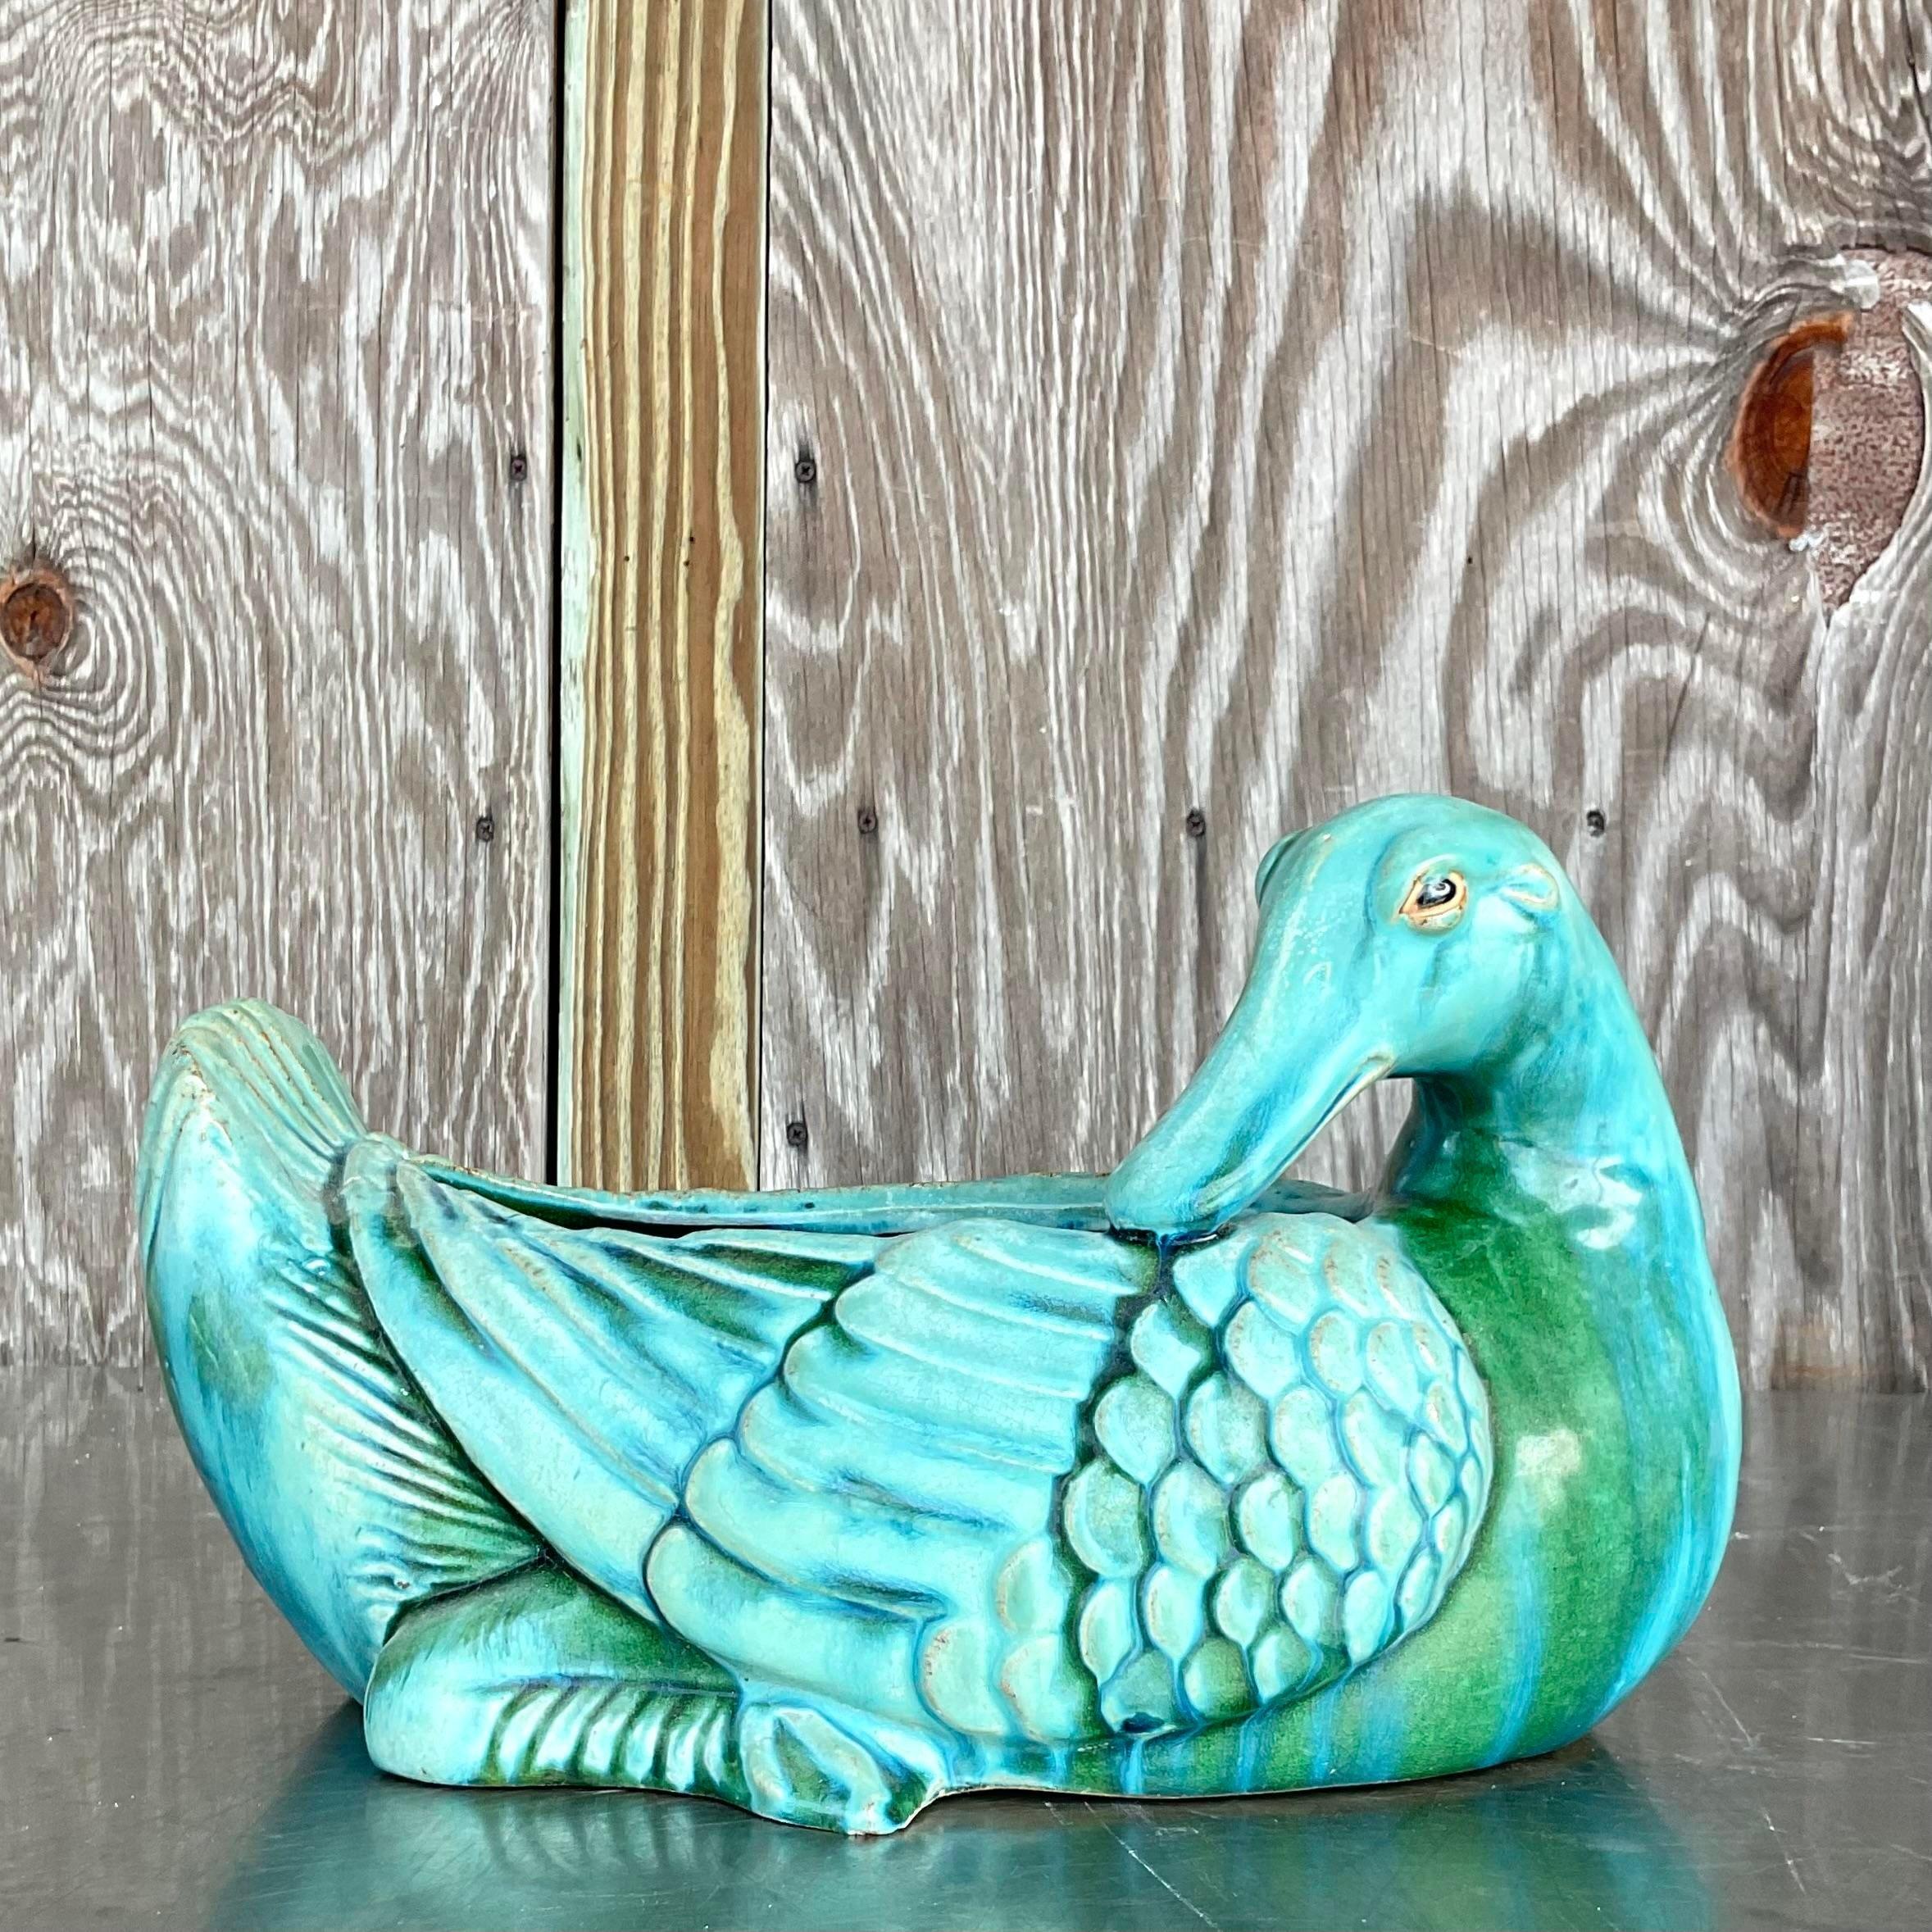 Add a touch of whimsy and character to your space with this delightful vintage ceramic duck planter. With its bohemian flair and glossy glazed finish, this charming piece brings a playful yet sophisticated vibe to any room. Perfect for eclectic